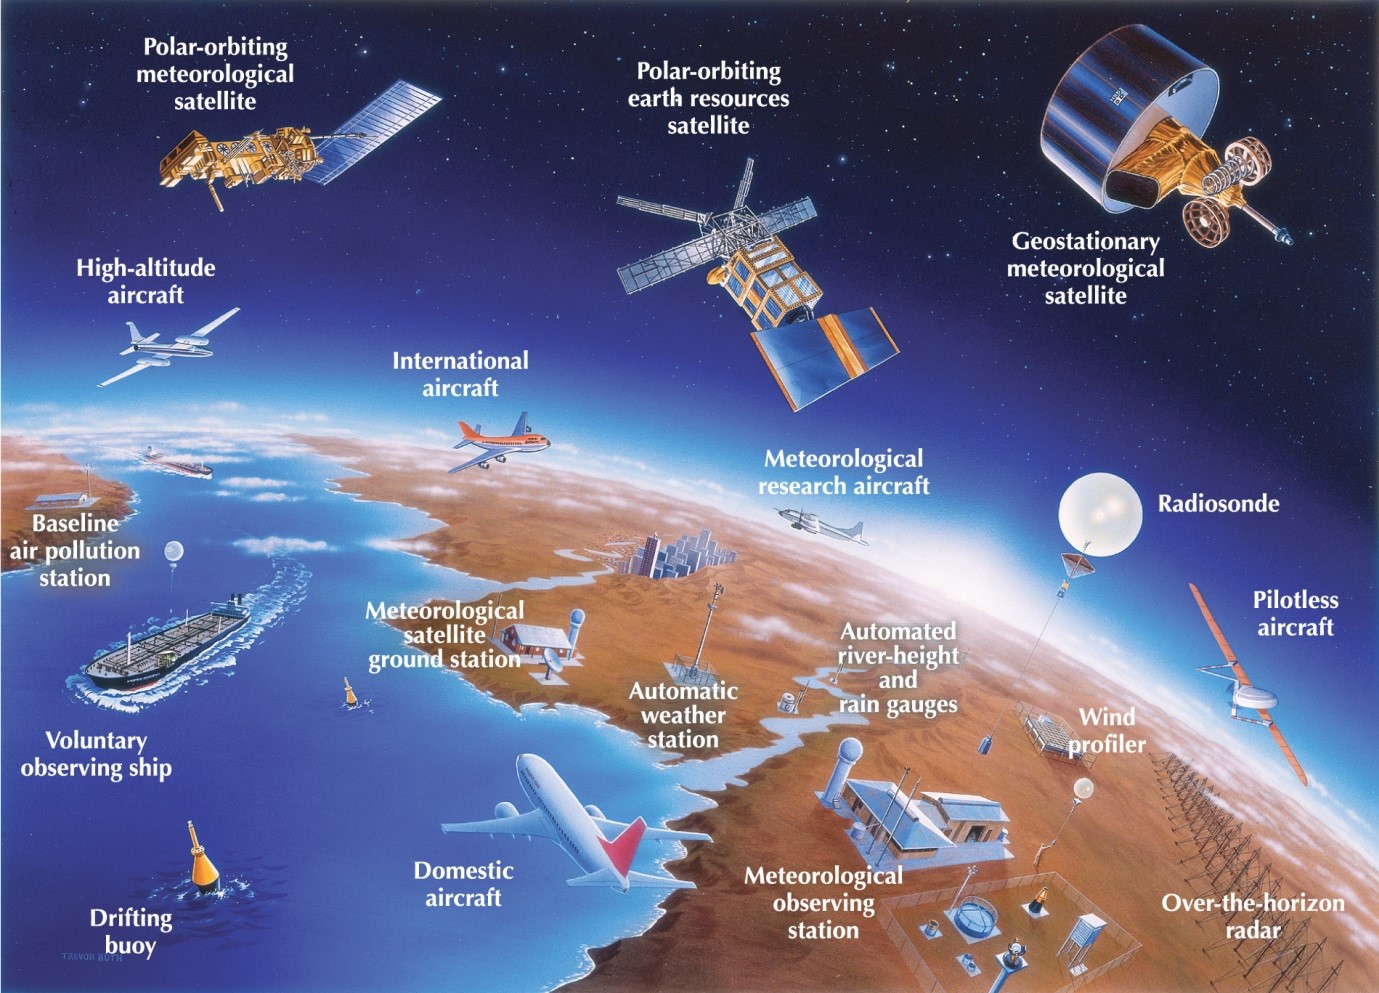 Diagram showing meteorological equipment recording observations from under the sea to in space.